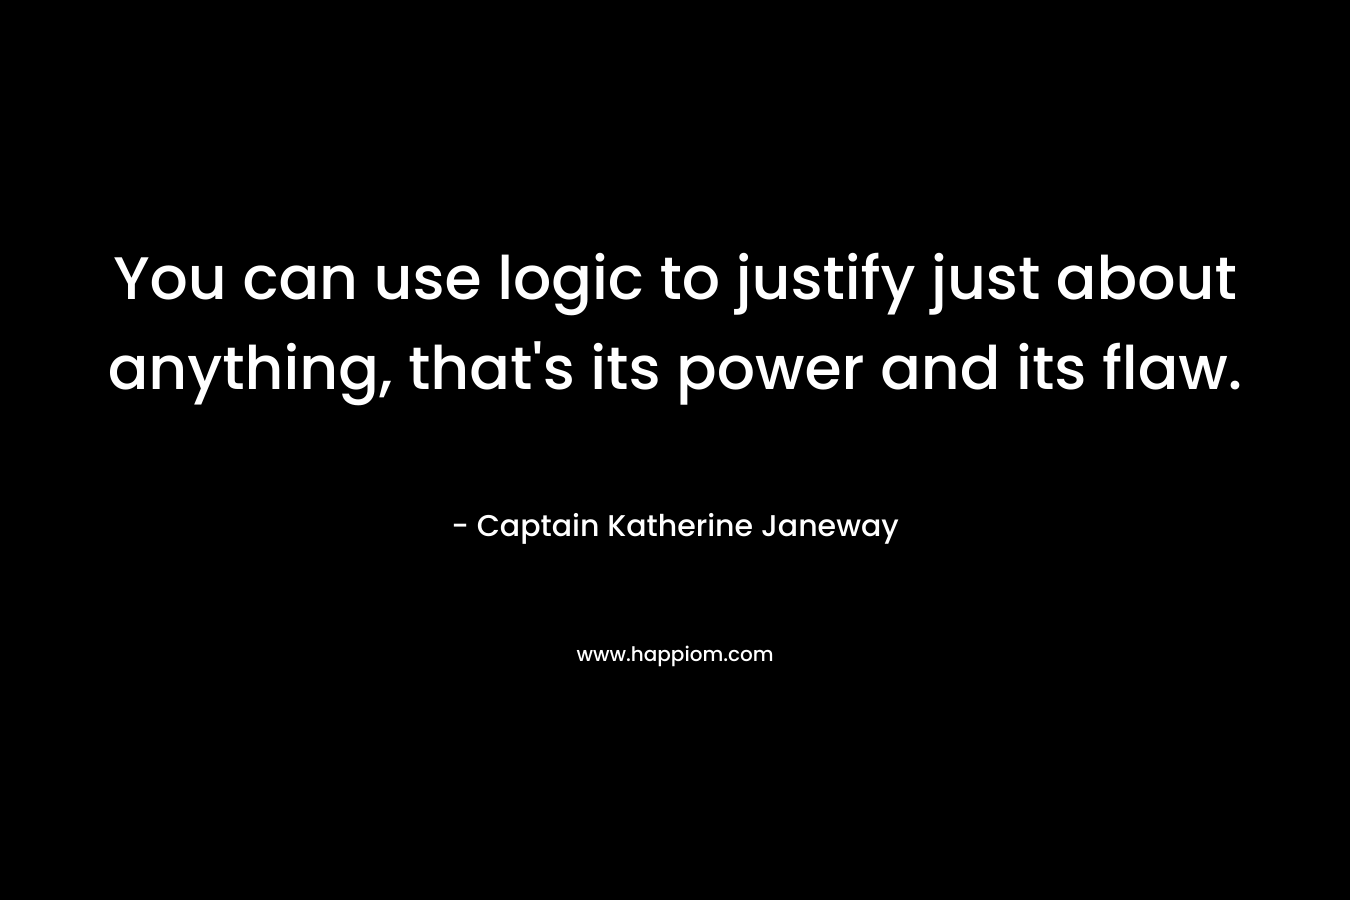 You can use logic to justify just about anything, that's its power and its flaw.